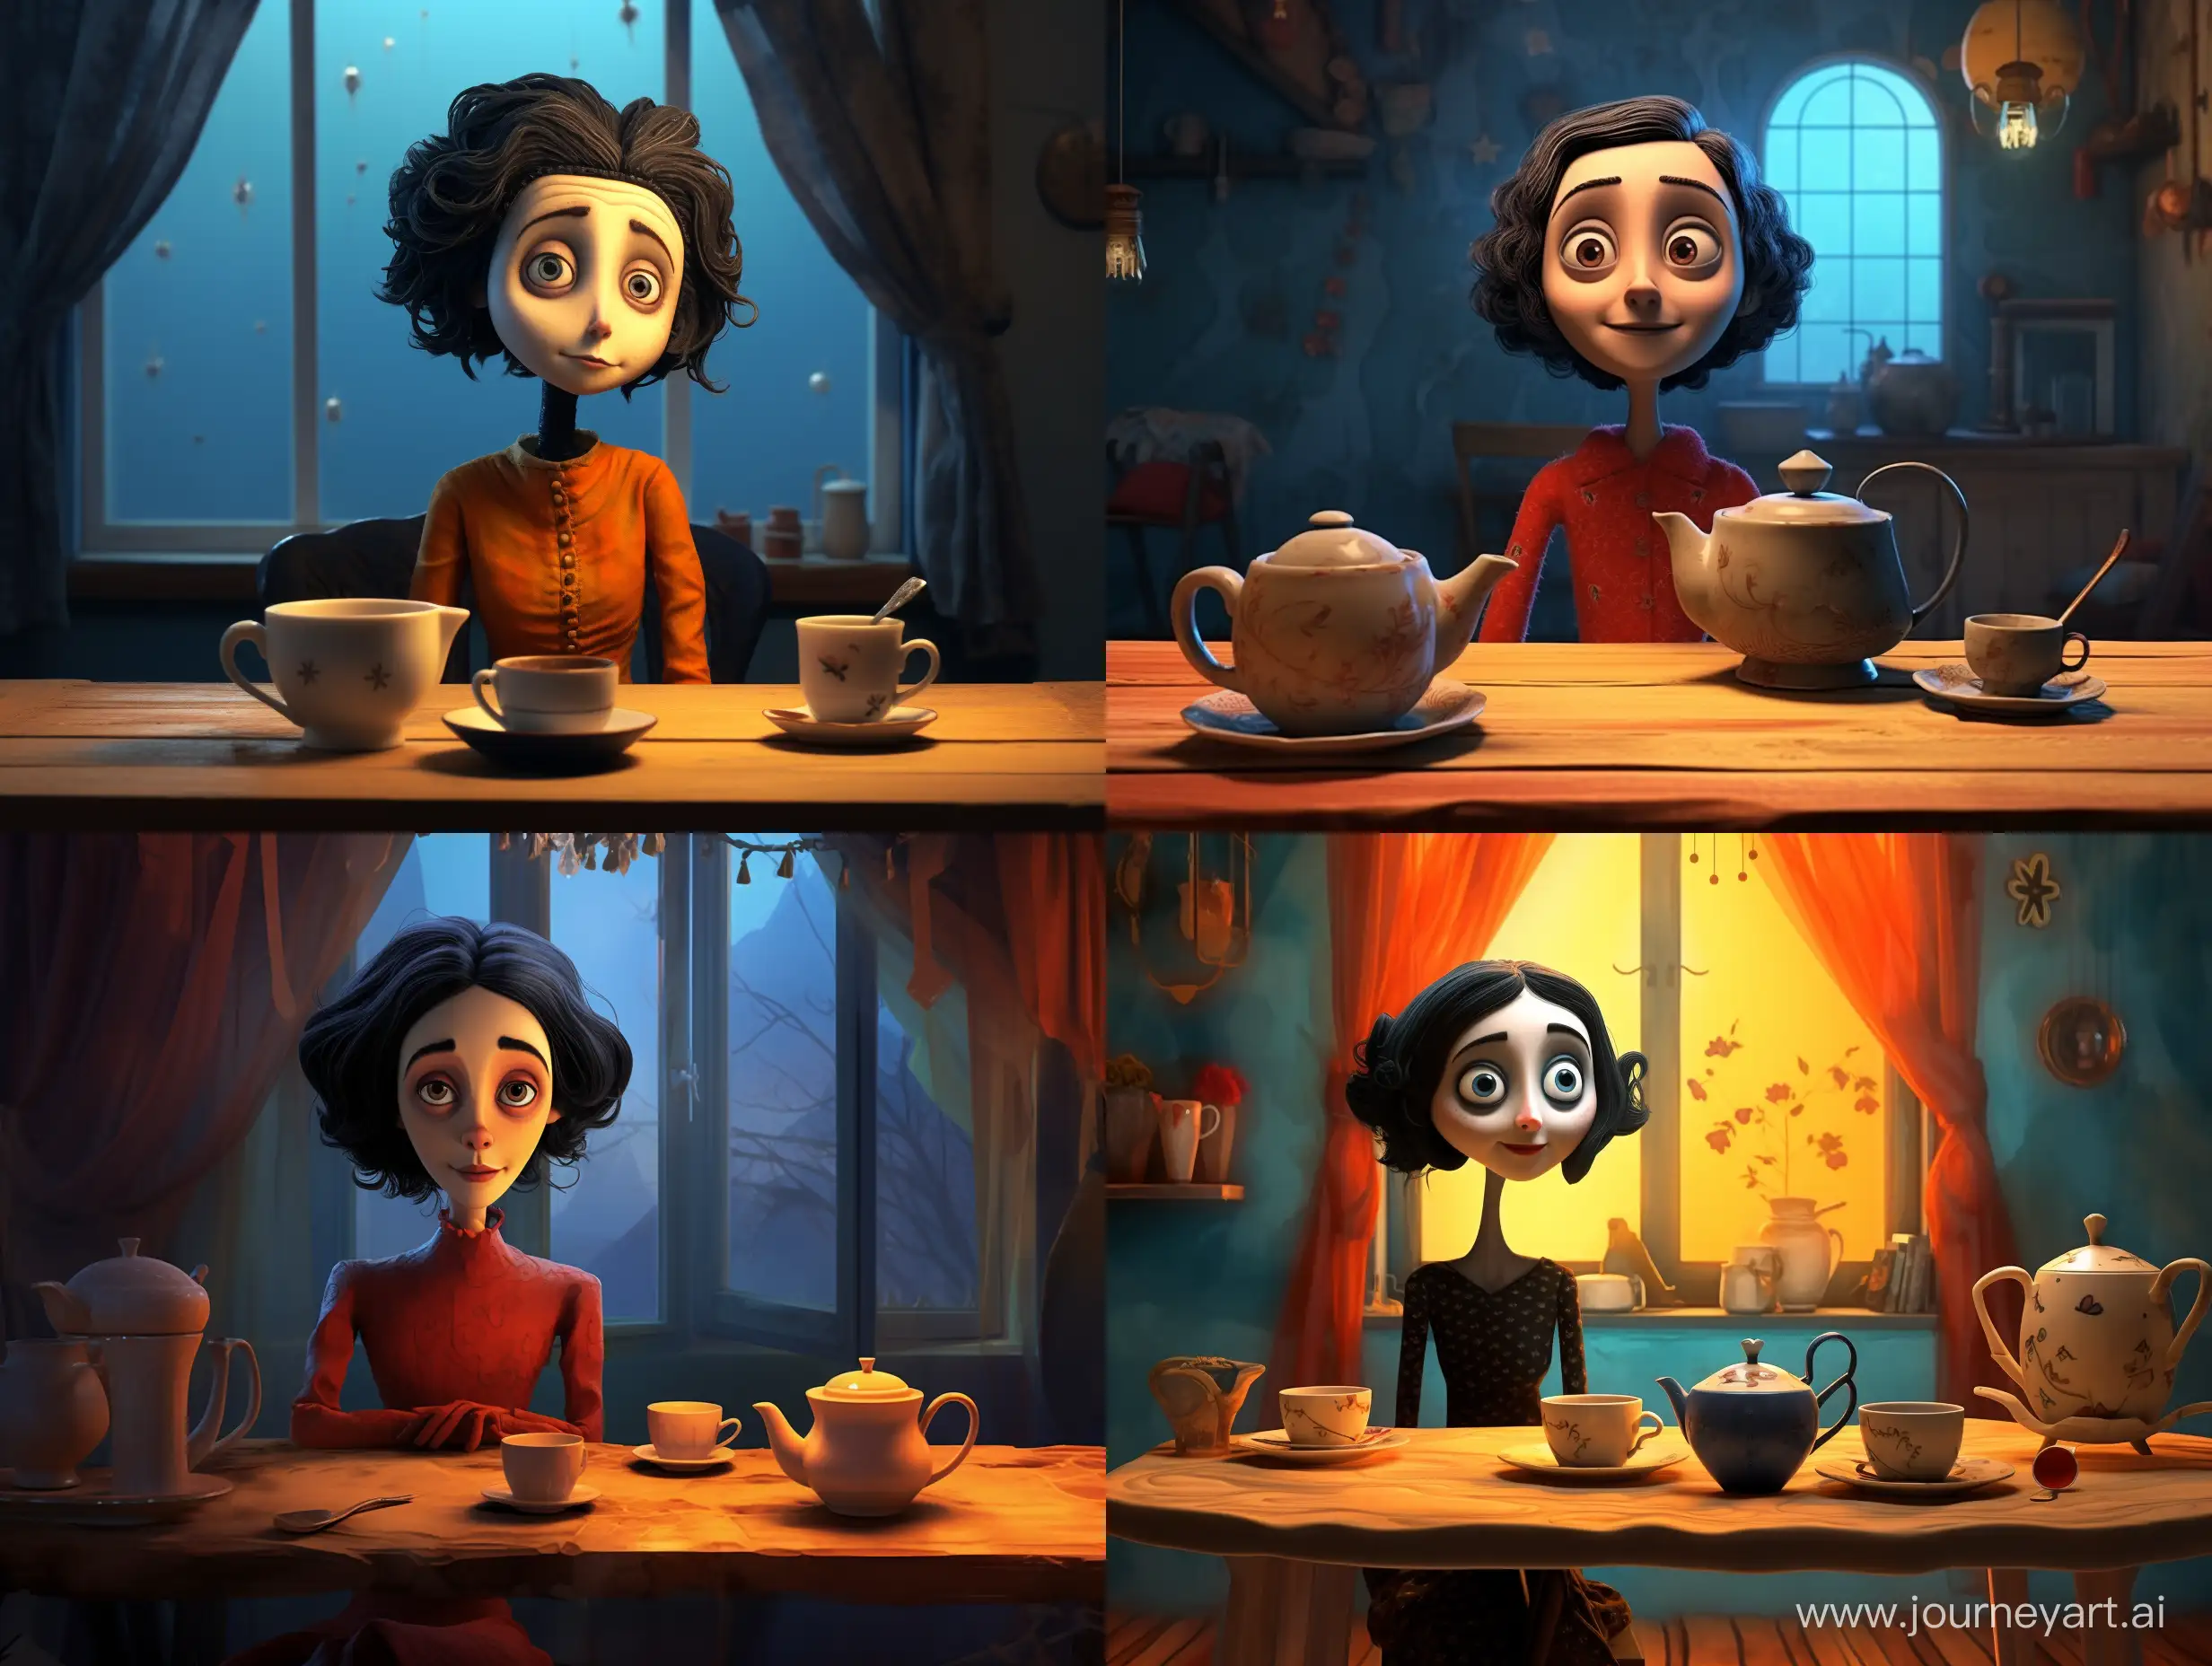 The second mother from the cartoon Coraline sits at the table and drinks tea